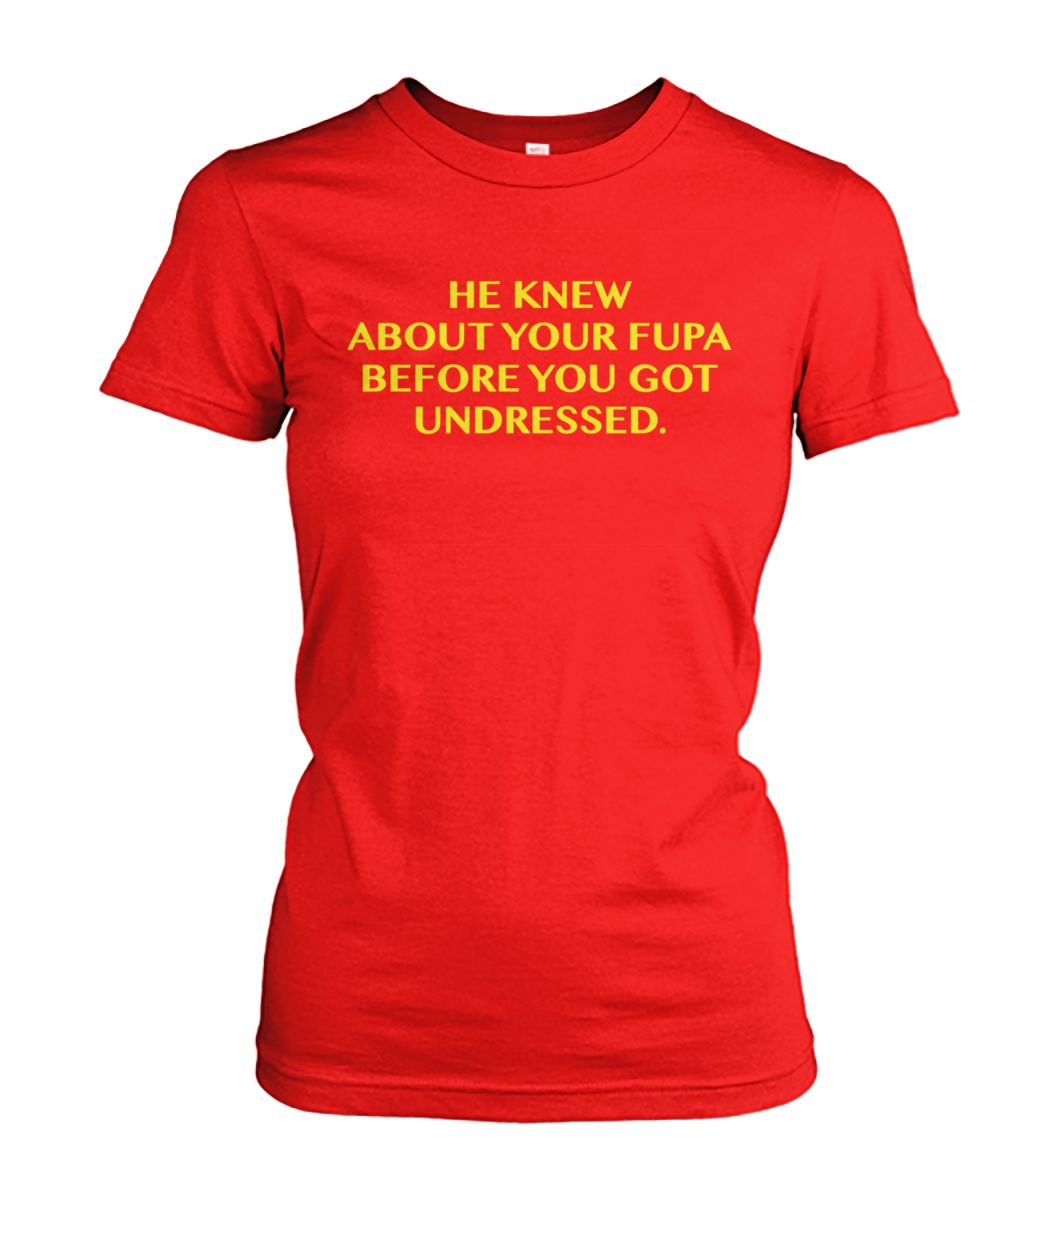 He knew about your fupa before got you undressed women's crew tee